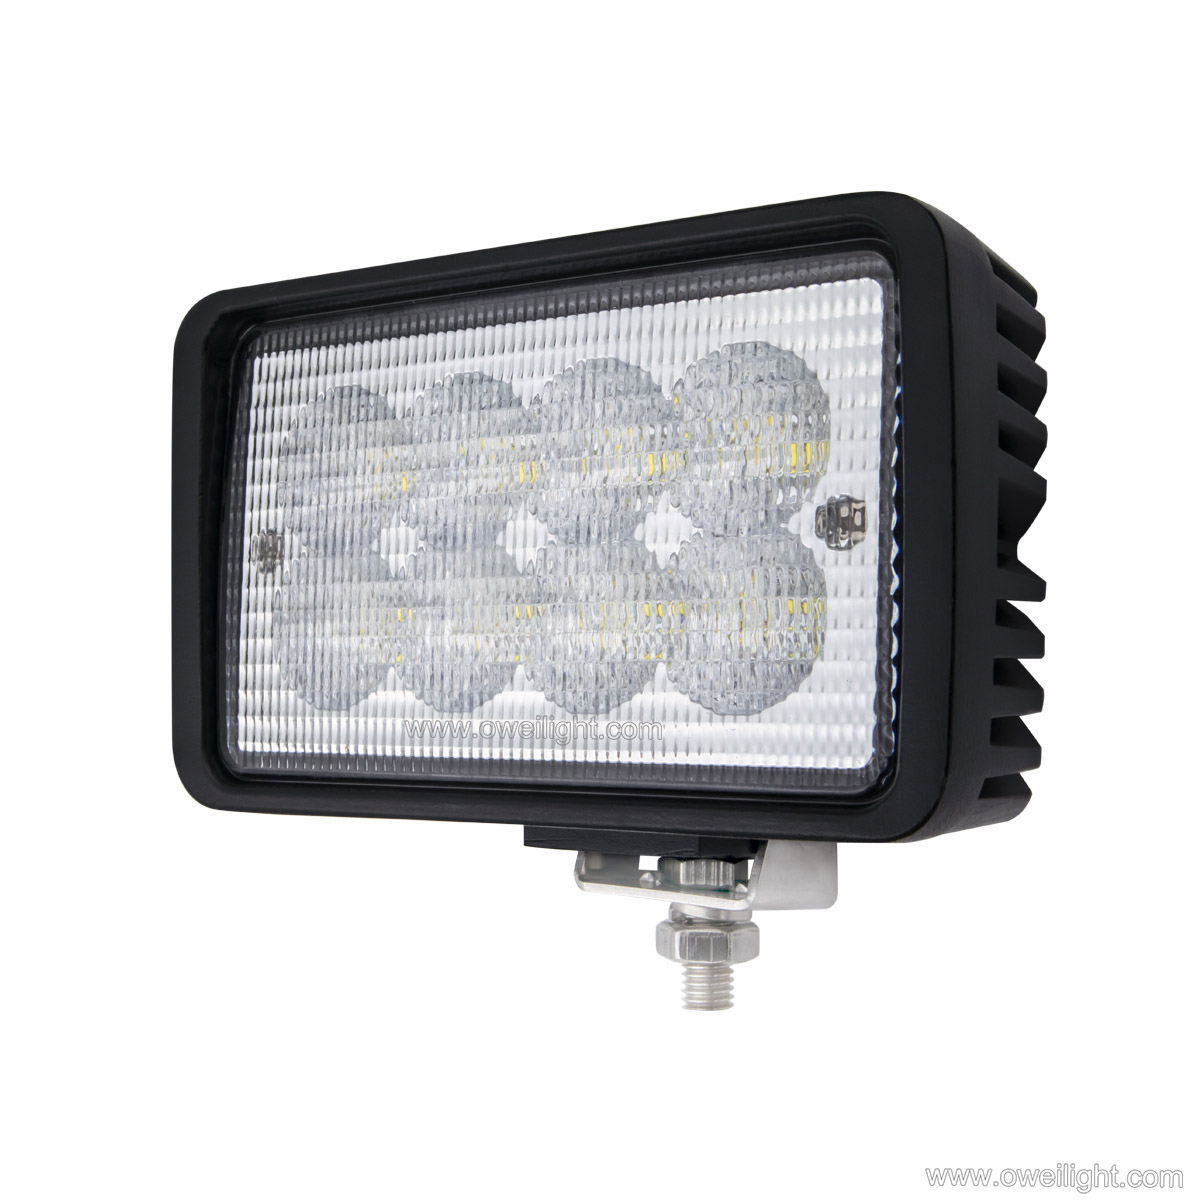 Agricultural Light - OW-4001-40W